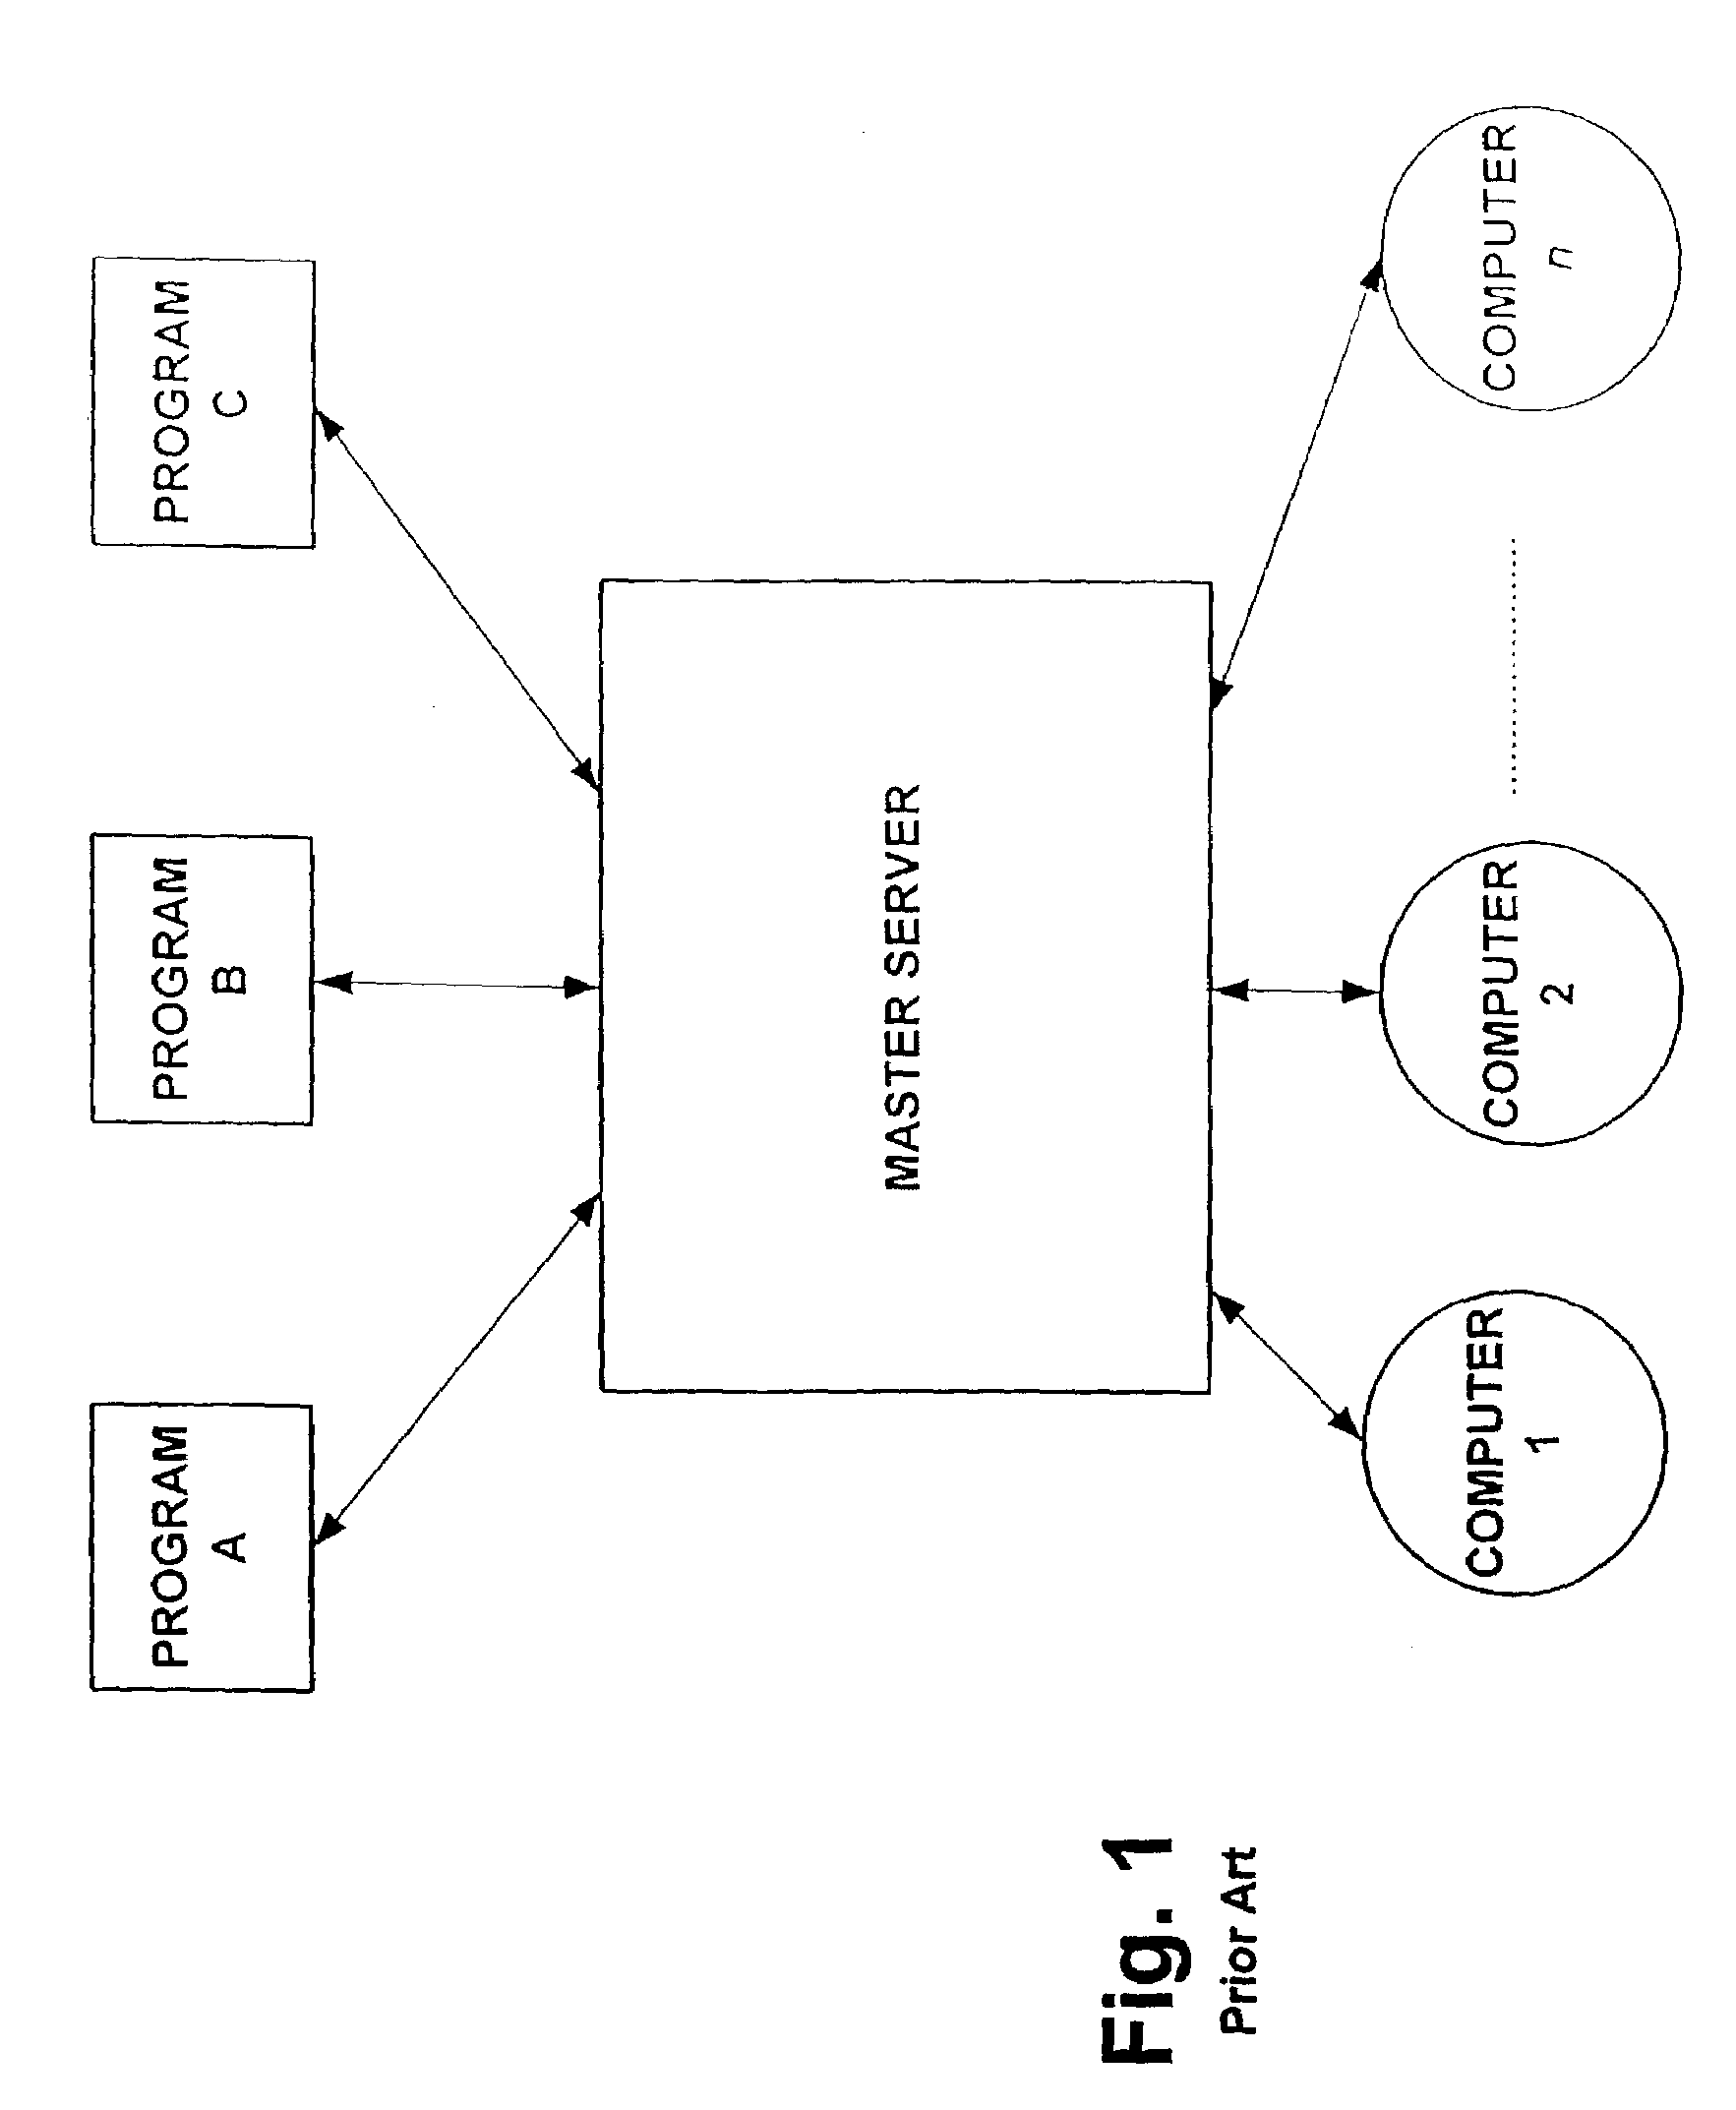 Parallel computing system, method and architecture